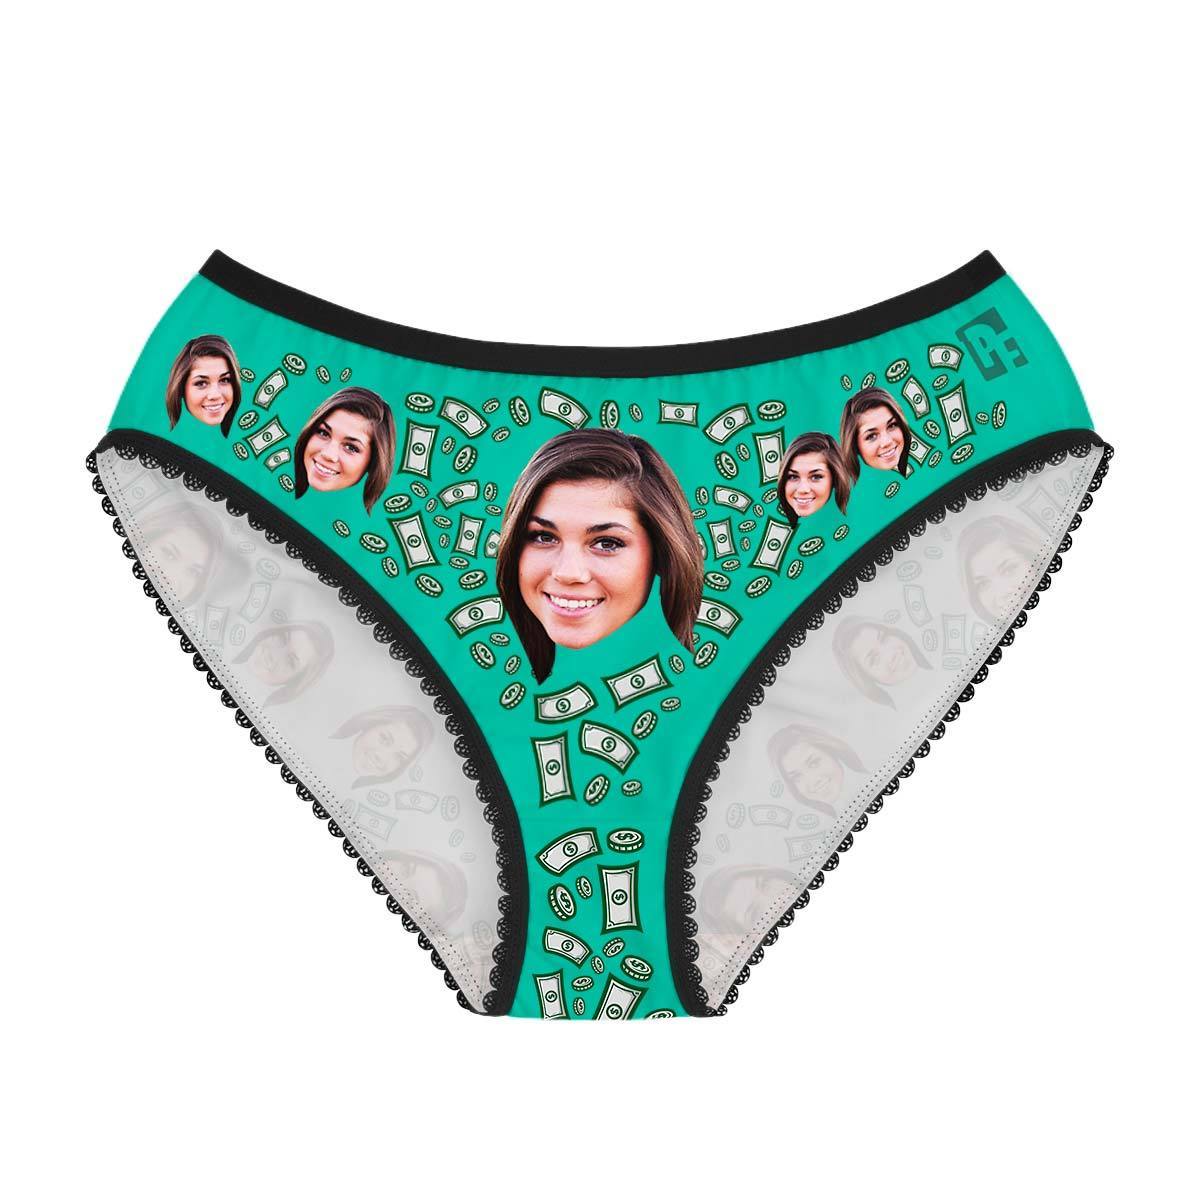 Mint Money women's underwear briefs personalized with photo printed on them